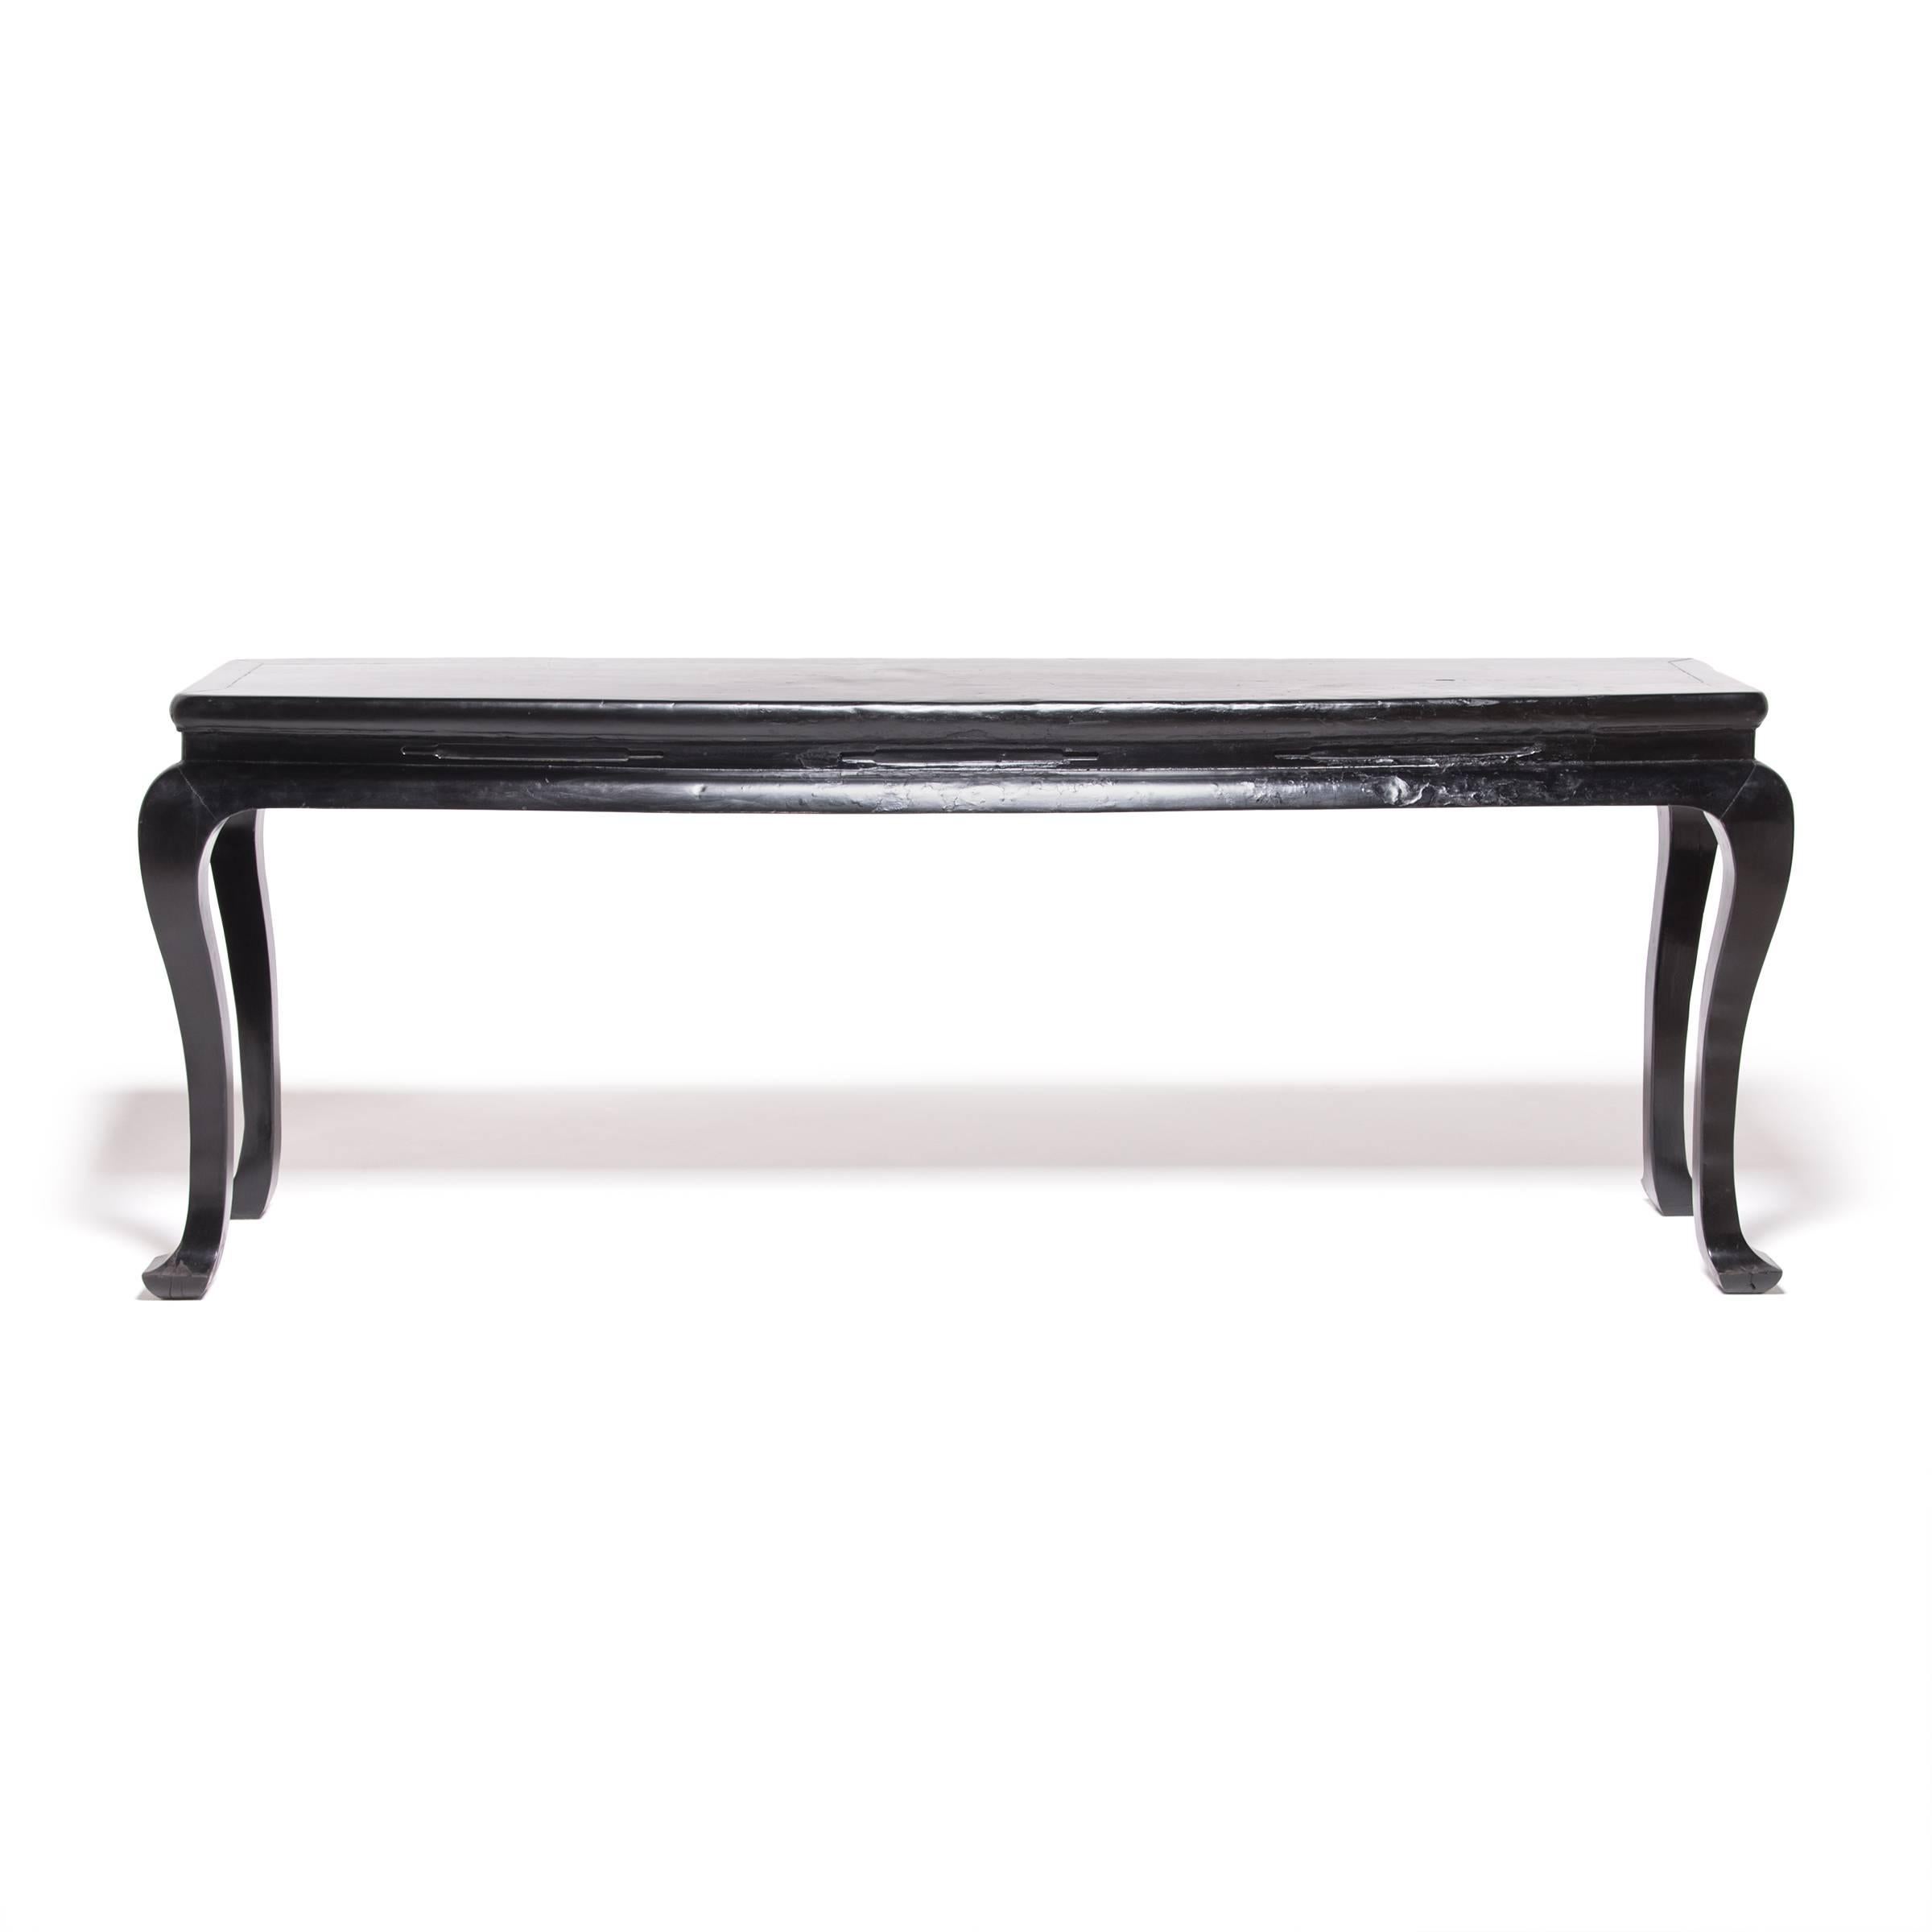 Qing 19th Century Chinese Black Lacquer Splayed Foot Altar Table